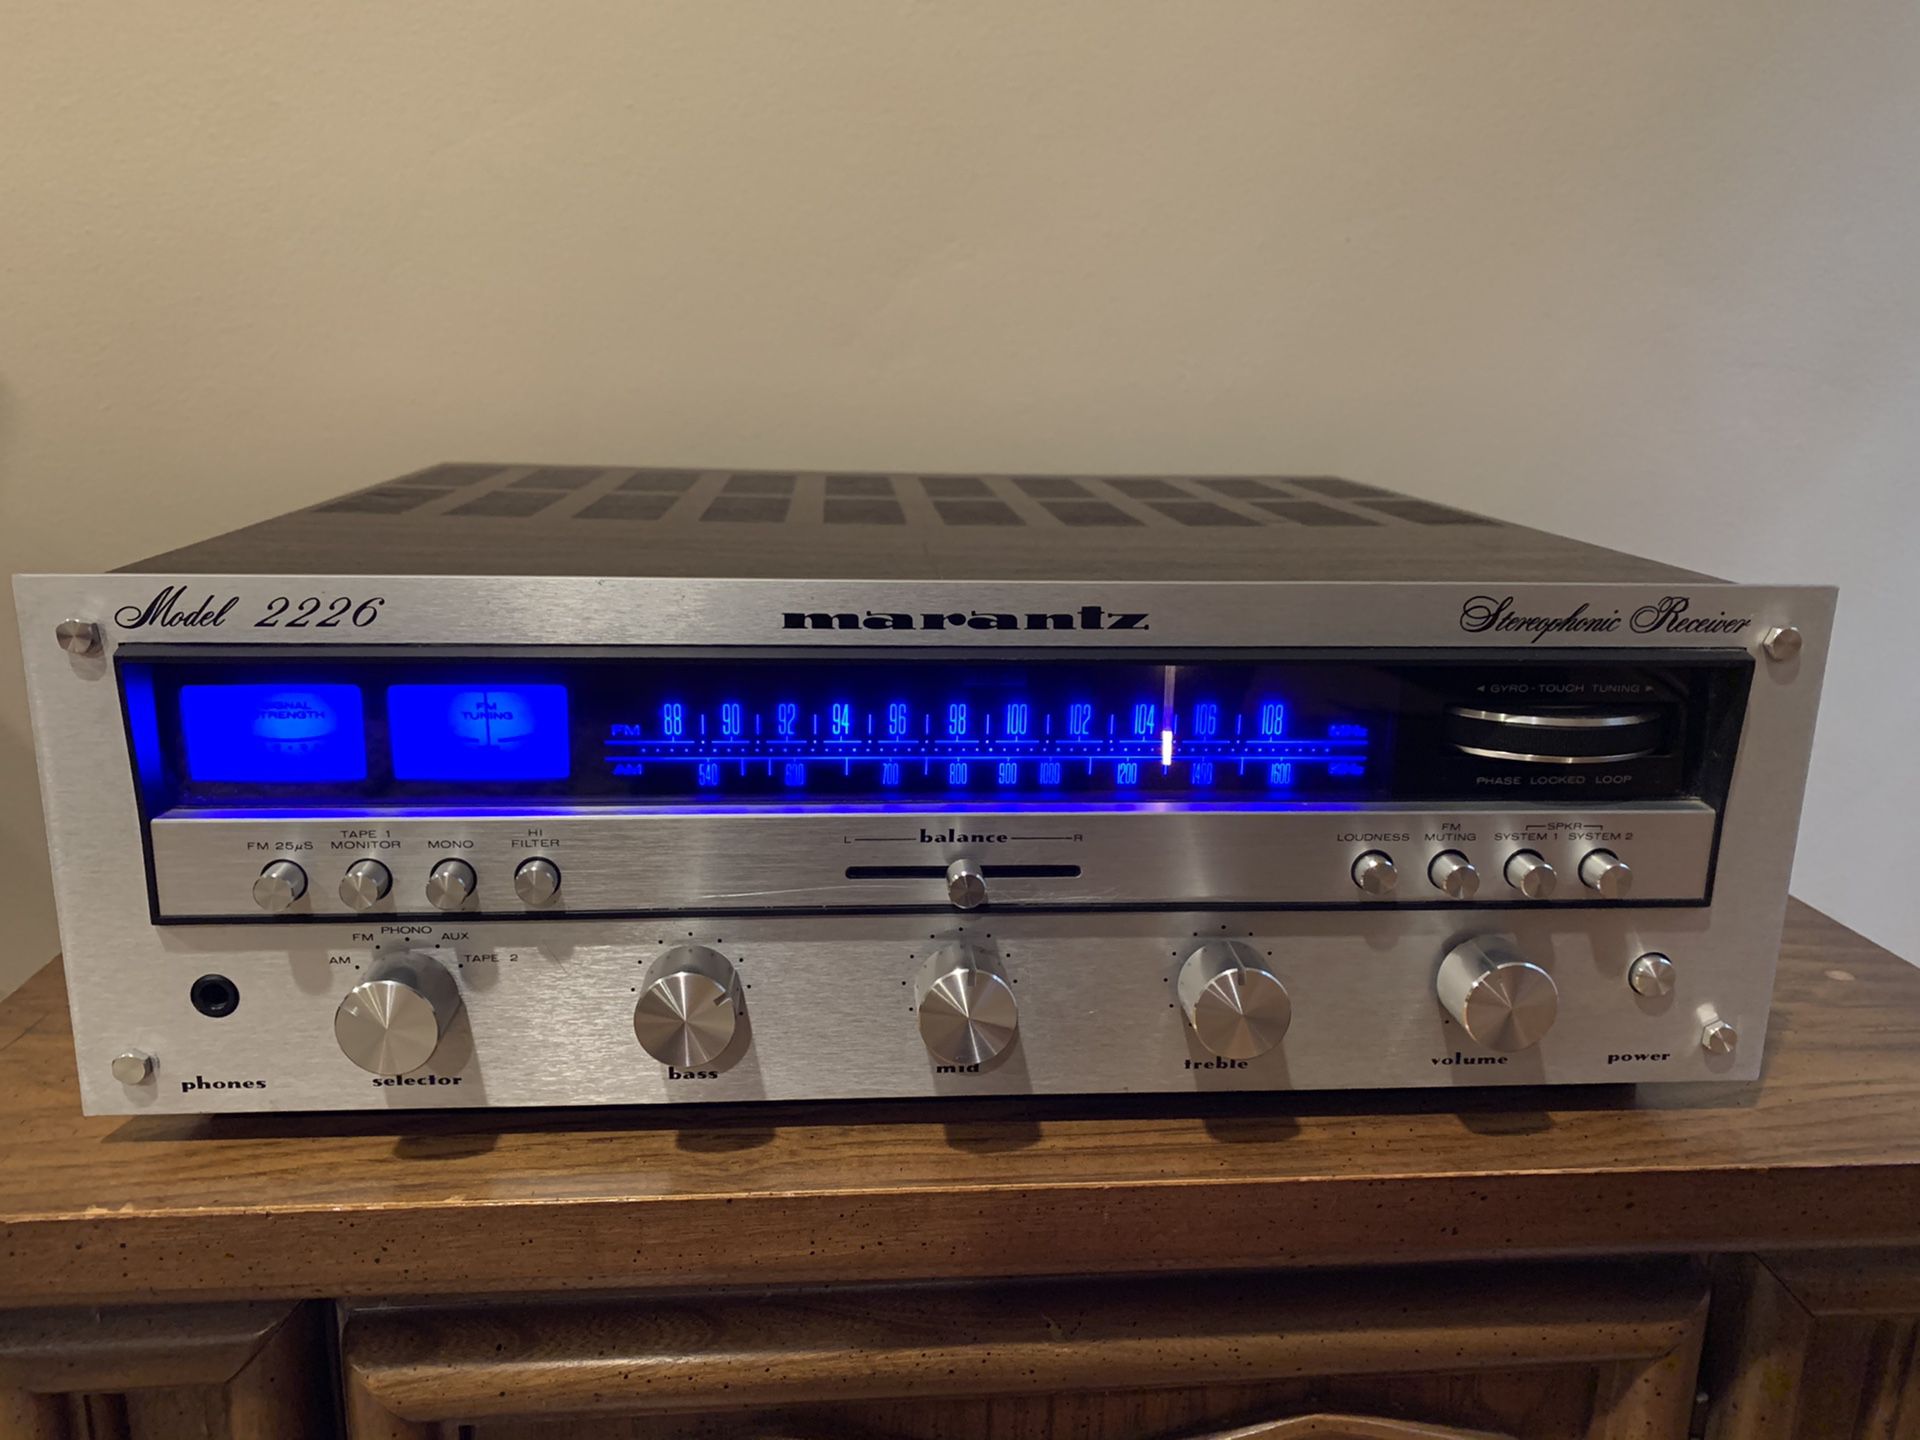 Marantz 2226 Stereophonic Receiver-Tested and Works Great-New LED Lights!